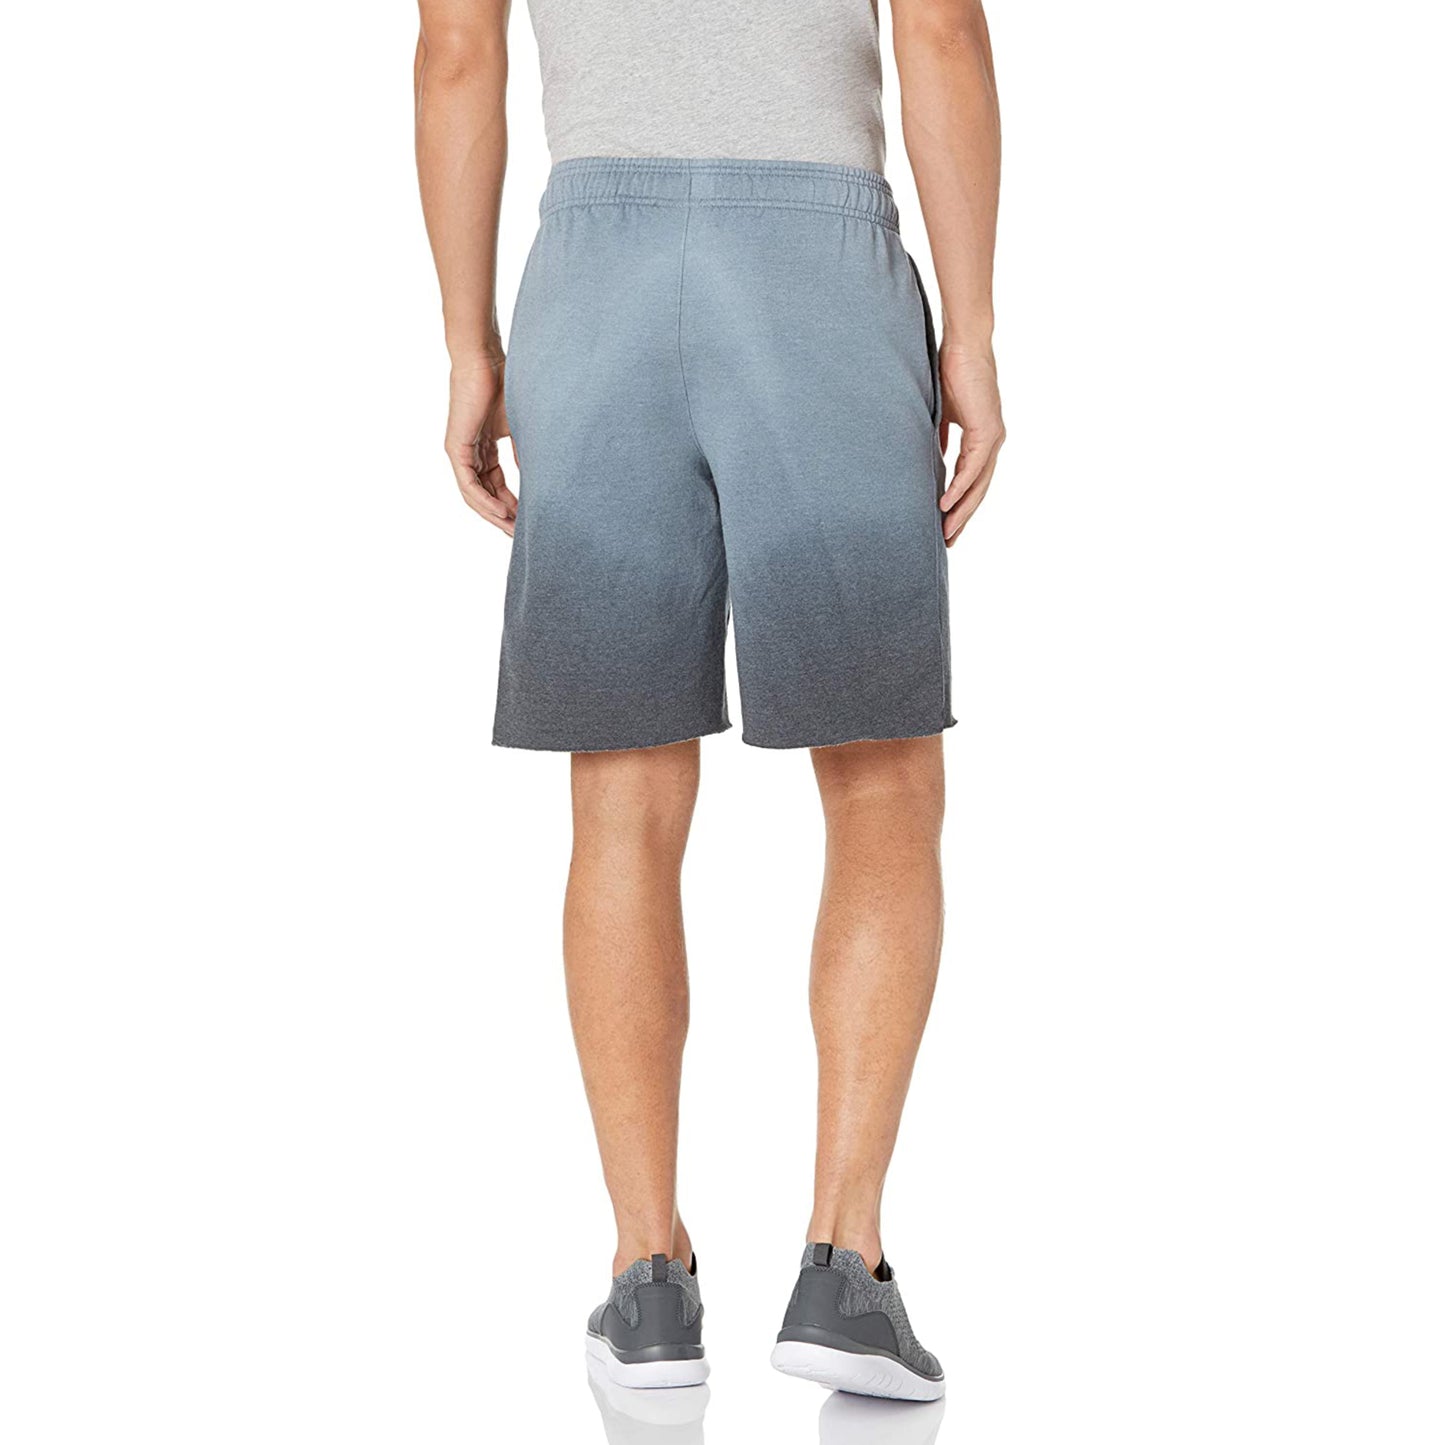 Champion Men's Moisture Wicking Ombre Powerblend Graphic Cotton Active Shorts